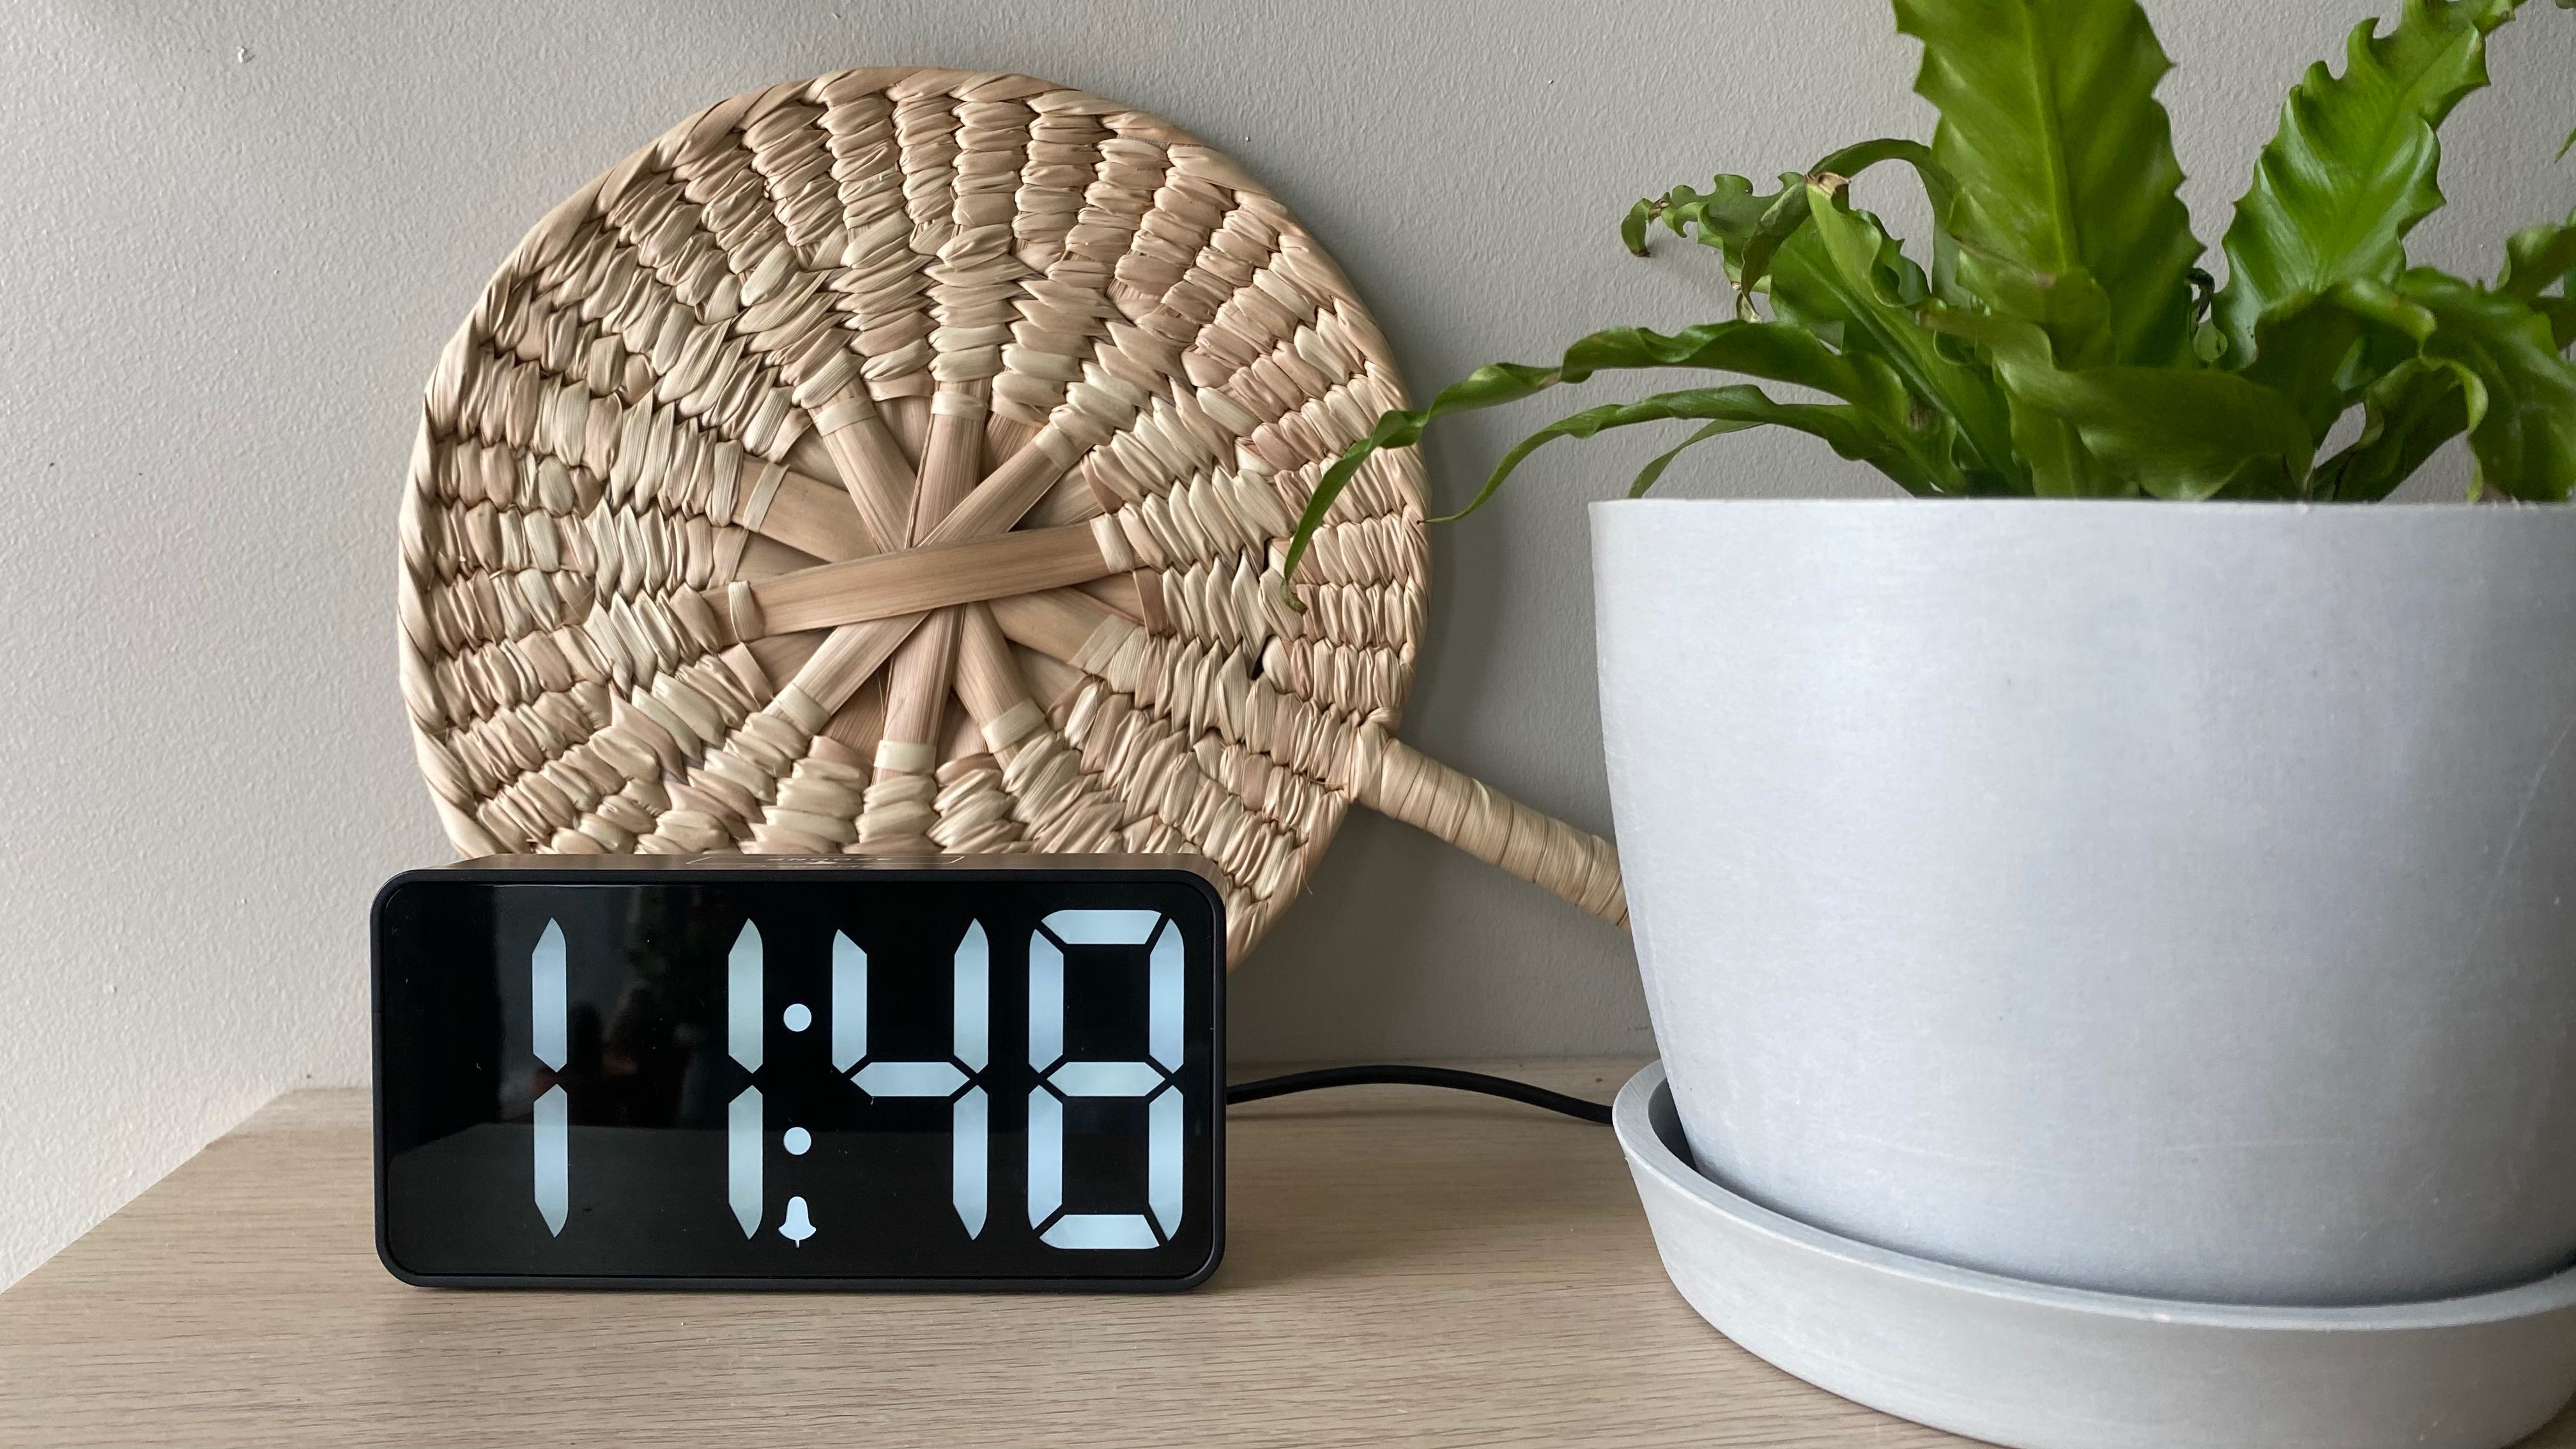 The Best Alarm Clocks (and Why You Should Use Them Instead of Your Phone)